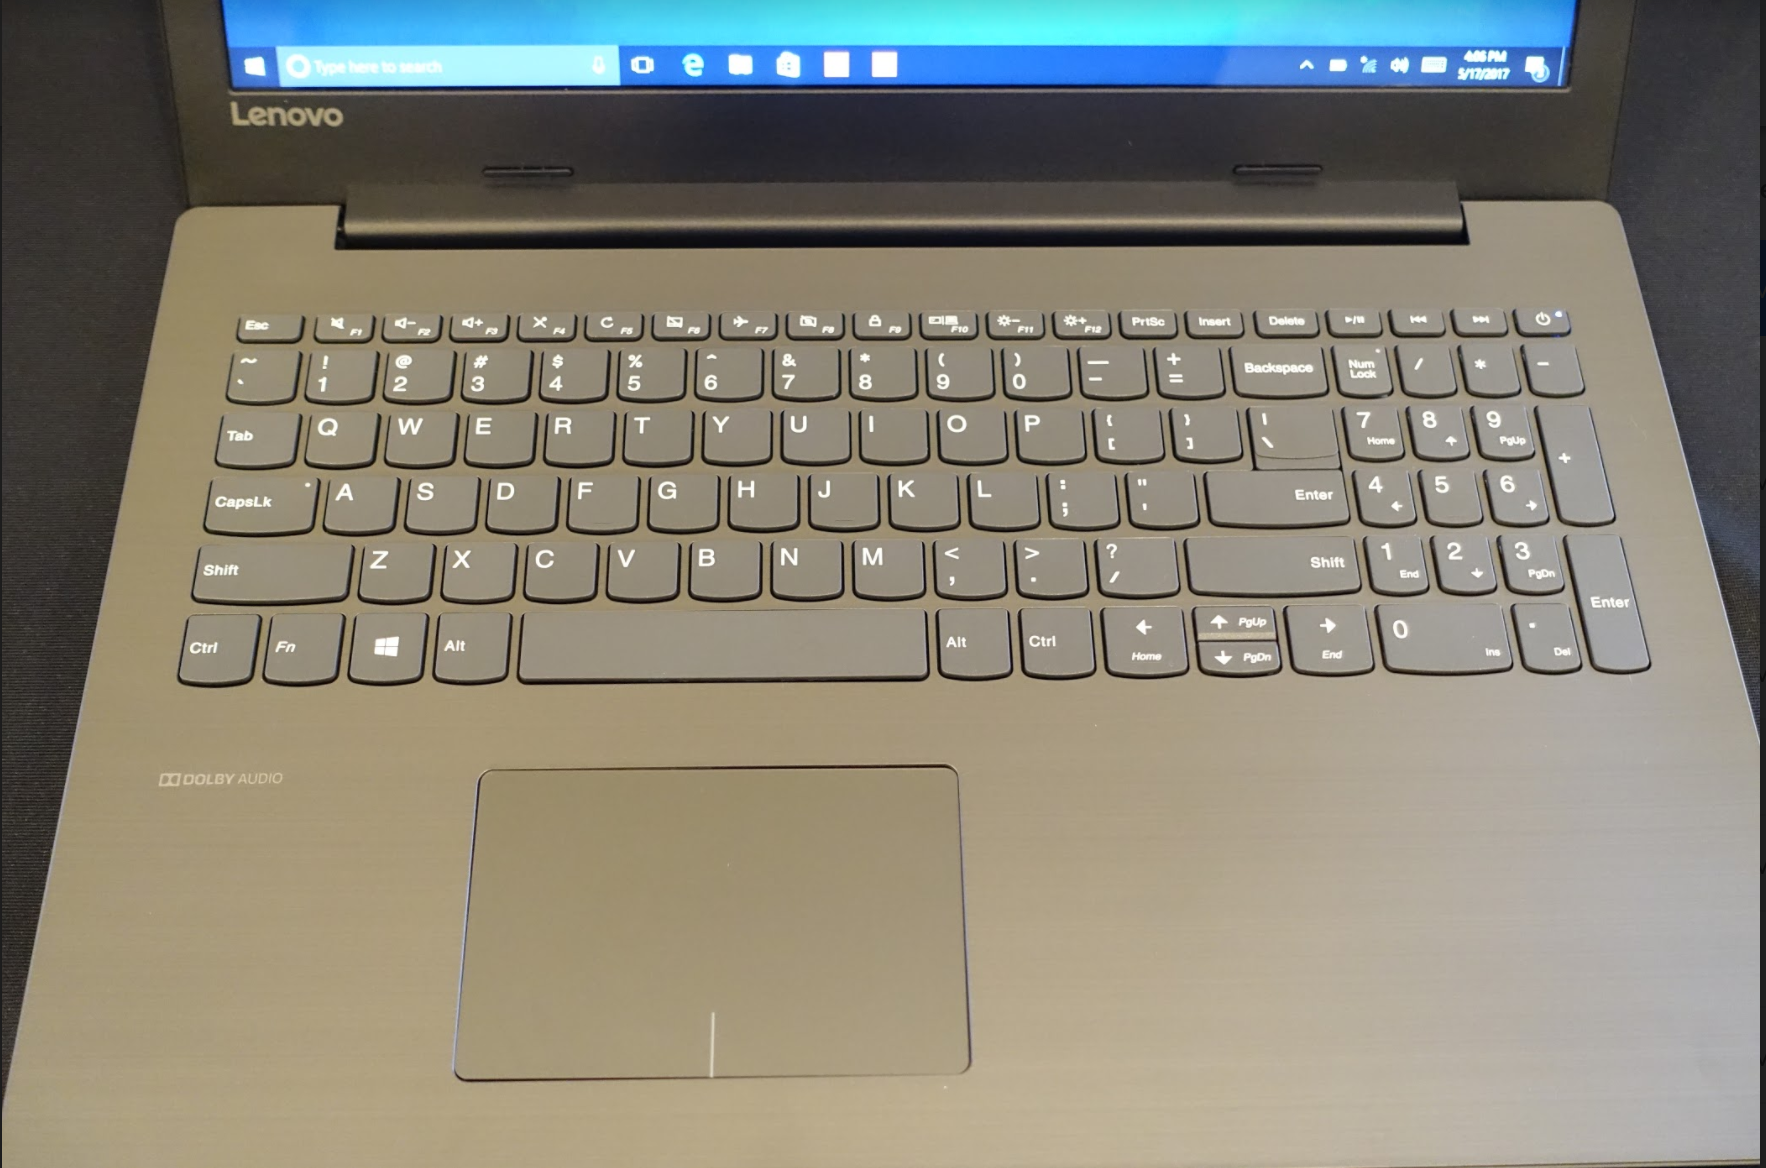 Hands On with the Completely Redesigned Lenovo IdeaPad